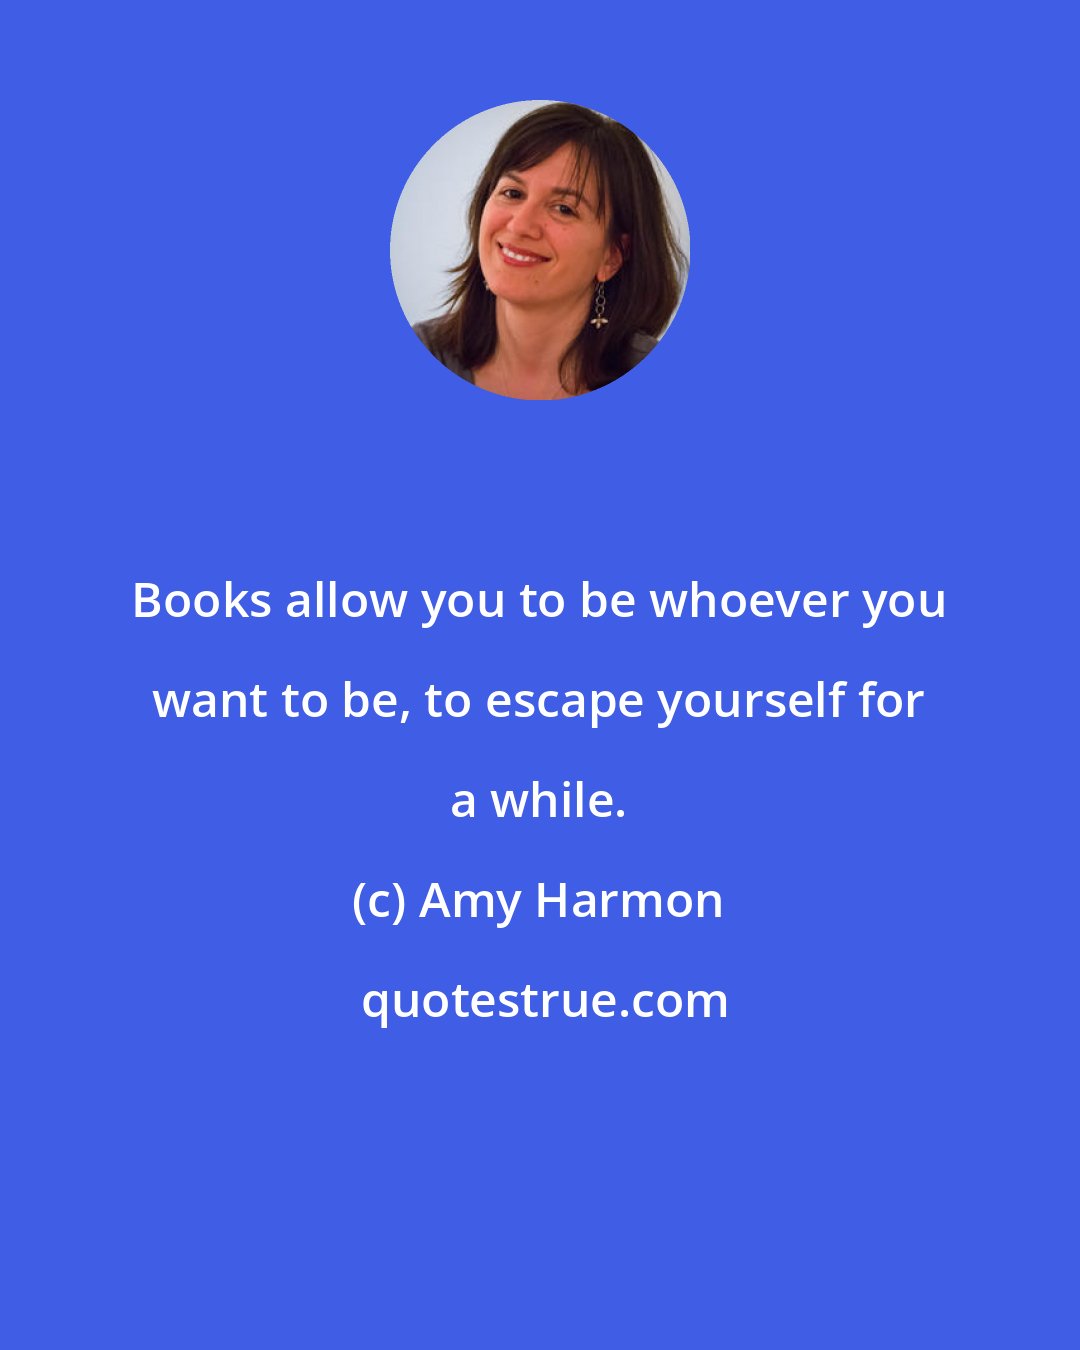 Amy Harmon: Books allow you to be whoever you want to be, to escape yourself for a while.